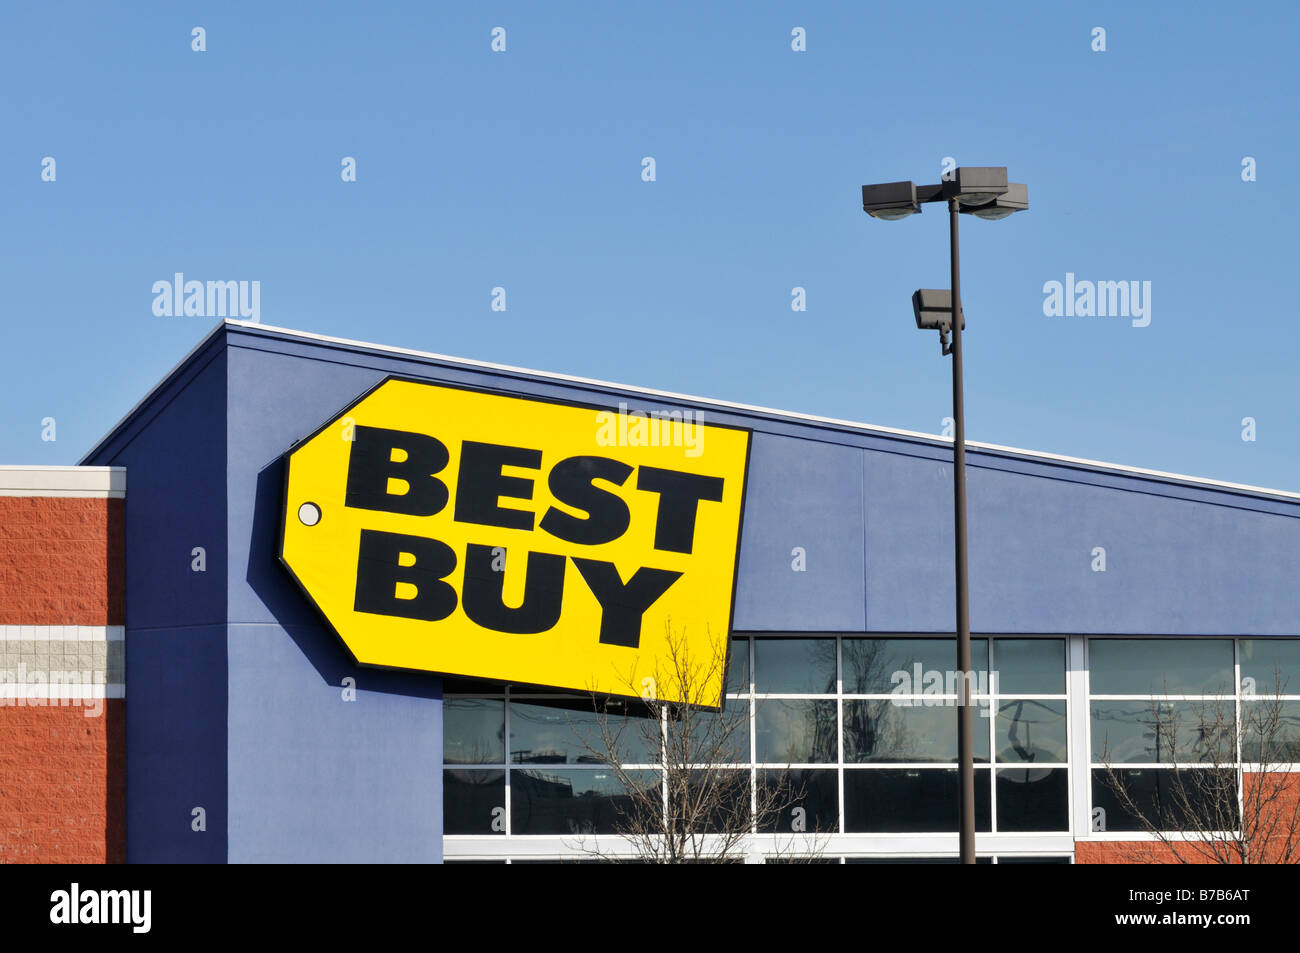 Exterior facade with sign of Best Buy retail store in Massachusetts USA. Stock Photo